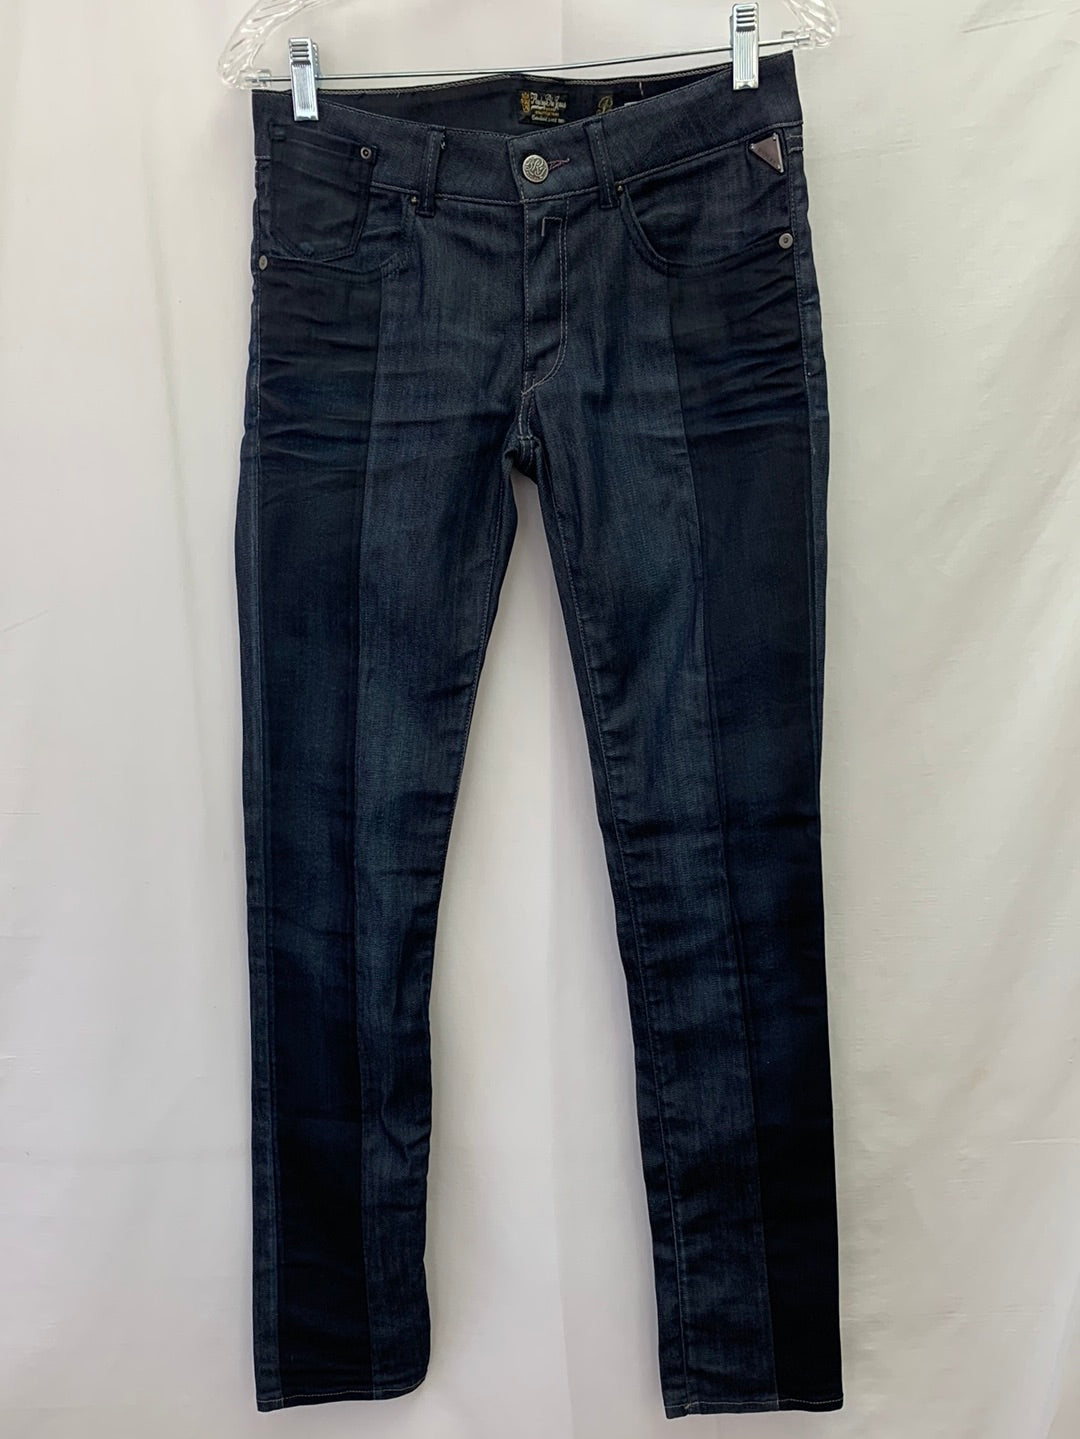 REPLAY BLUE JEANS dark wash Panel Stripe Mid Rise 'Ranidae' Jeans - 30x32